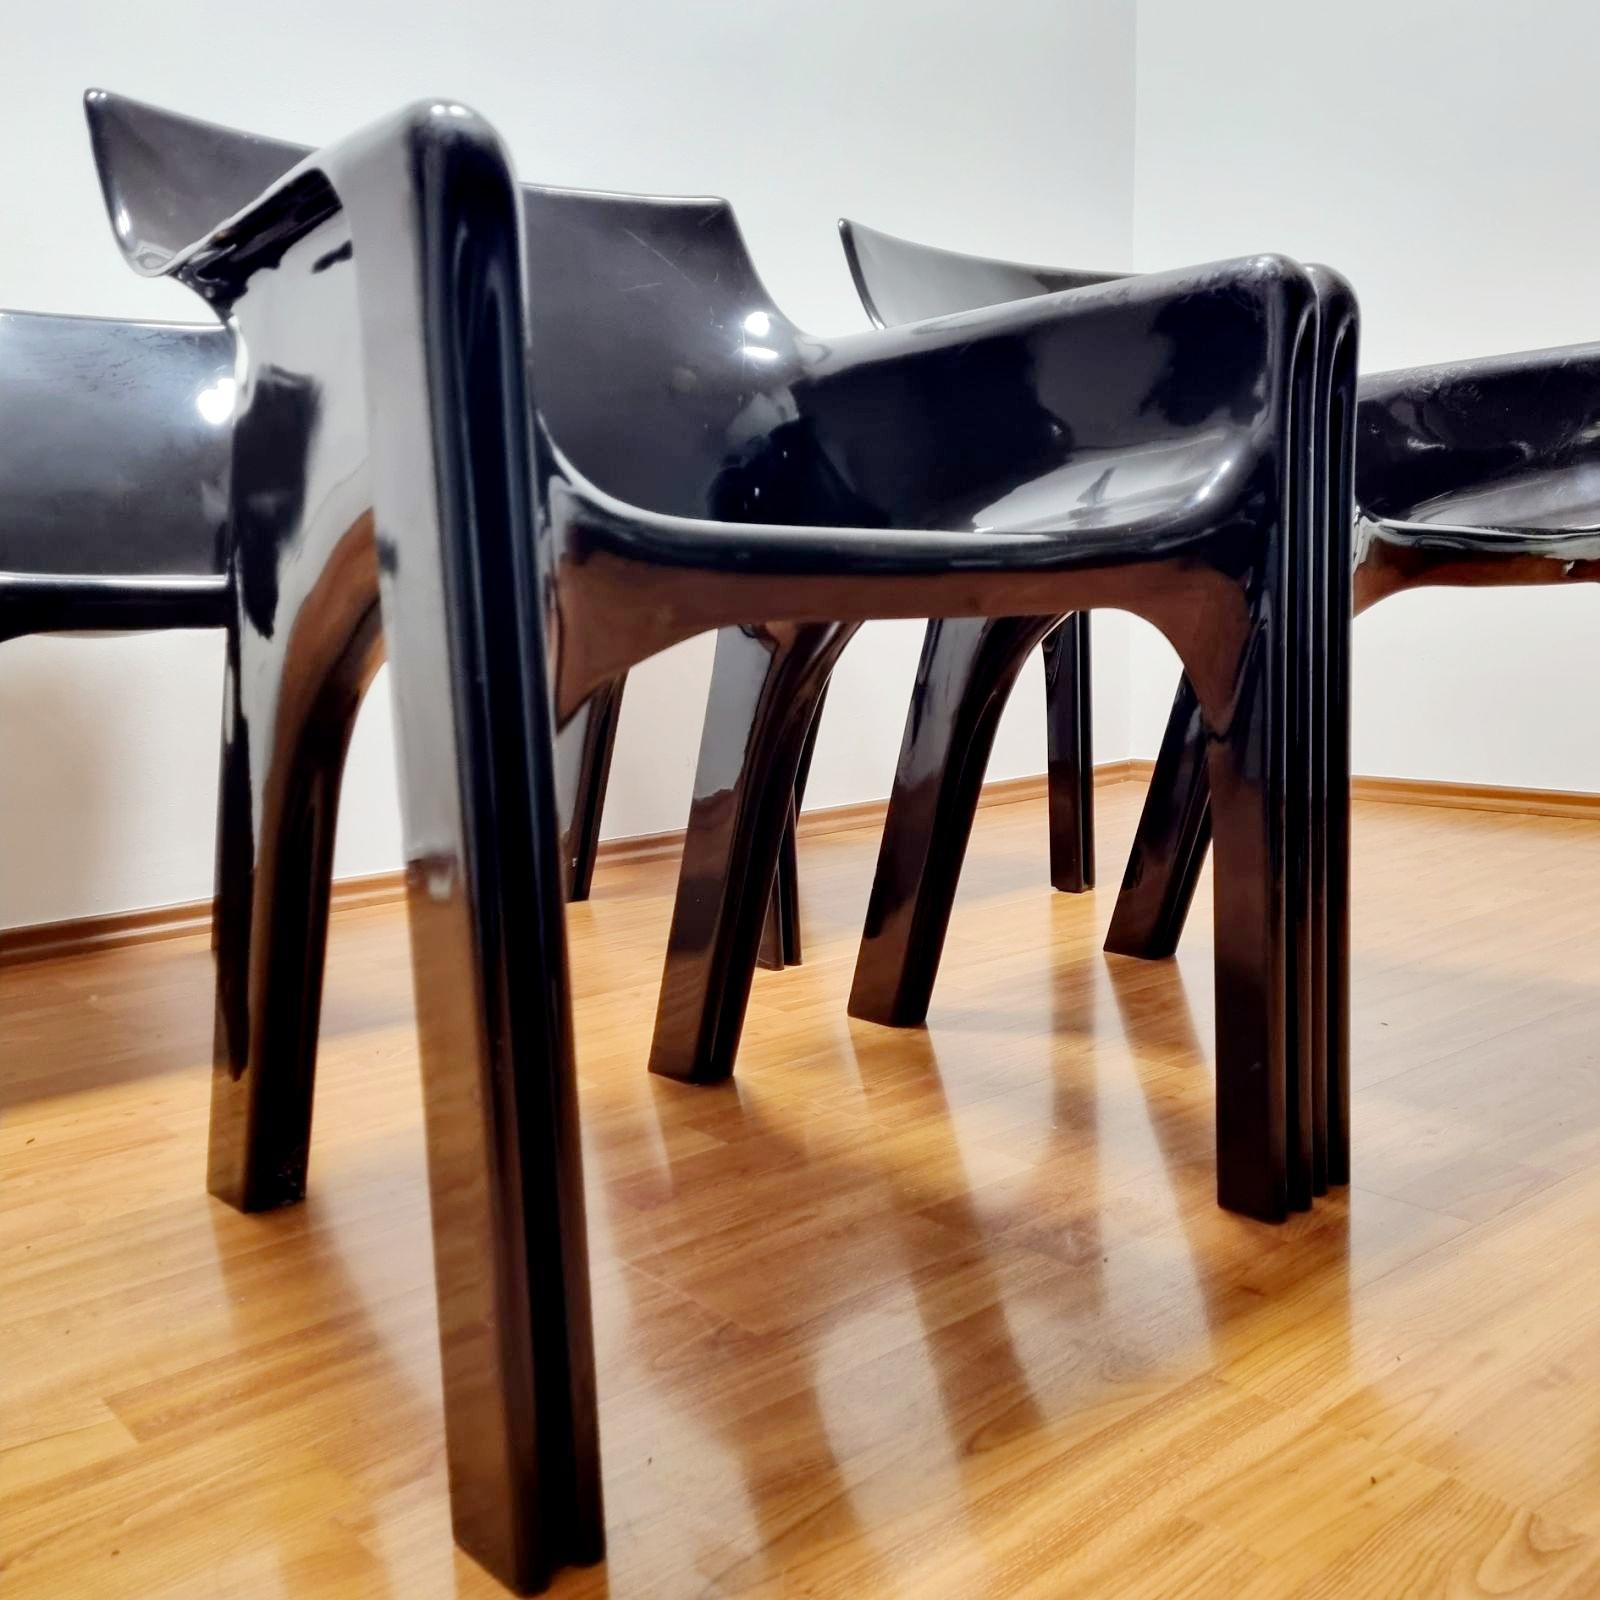 Set of 4 Italian Gaudi Chairs by Vico Magistretti for Artemide, Italy 70s For Sale 1